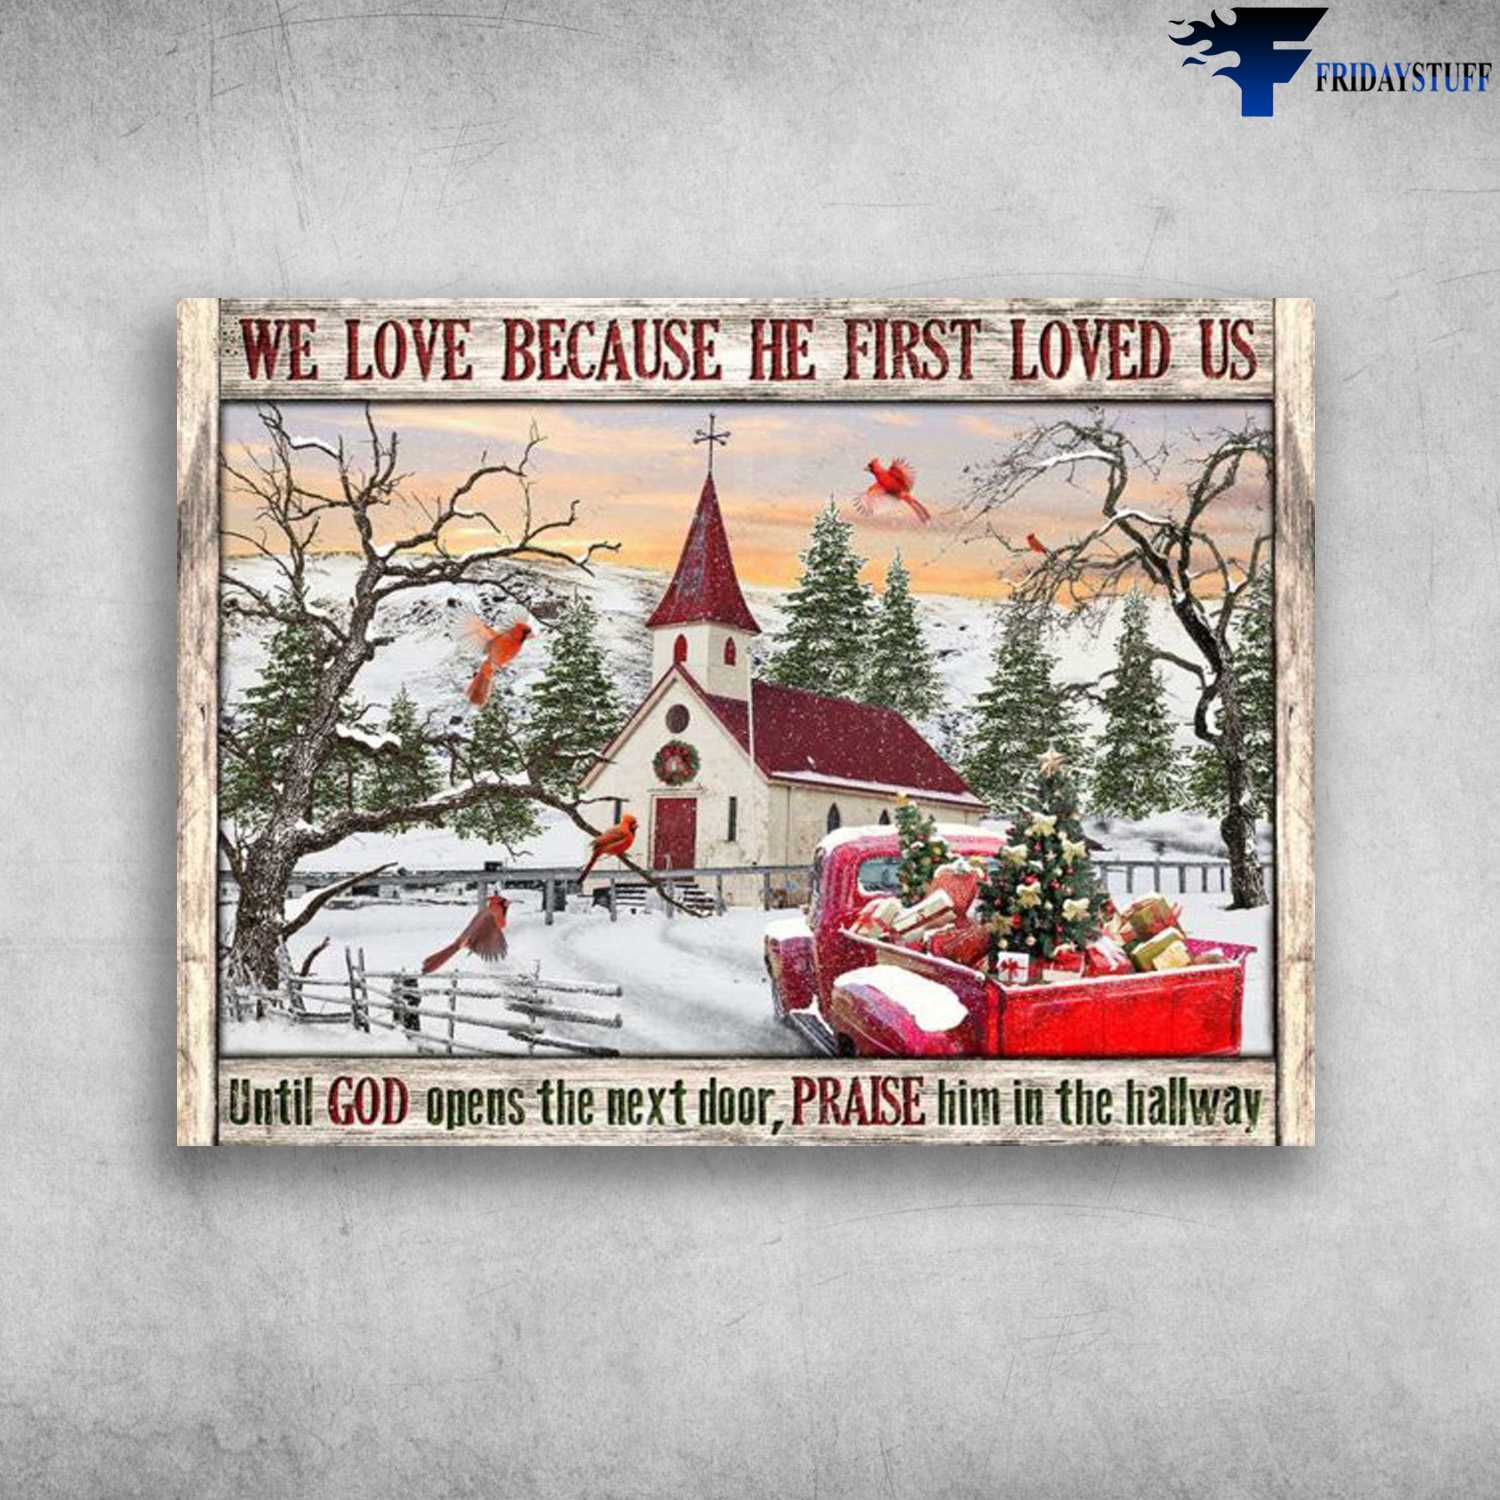 Cardinal Bird, Christmas Poster - We Love Because He First Loved Us, Until God Open The Next Door, Praise Him In The Hallway